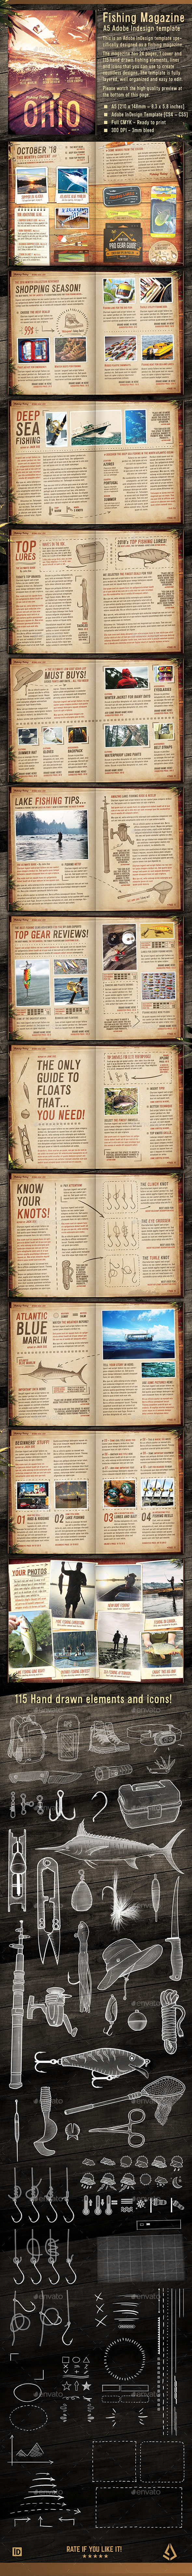 GraphicRiver Fishing Magazine Template 24 Pages 115 Hand Drawn elements A5 InDesign 20905014